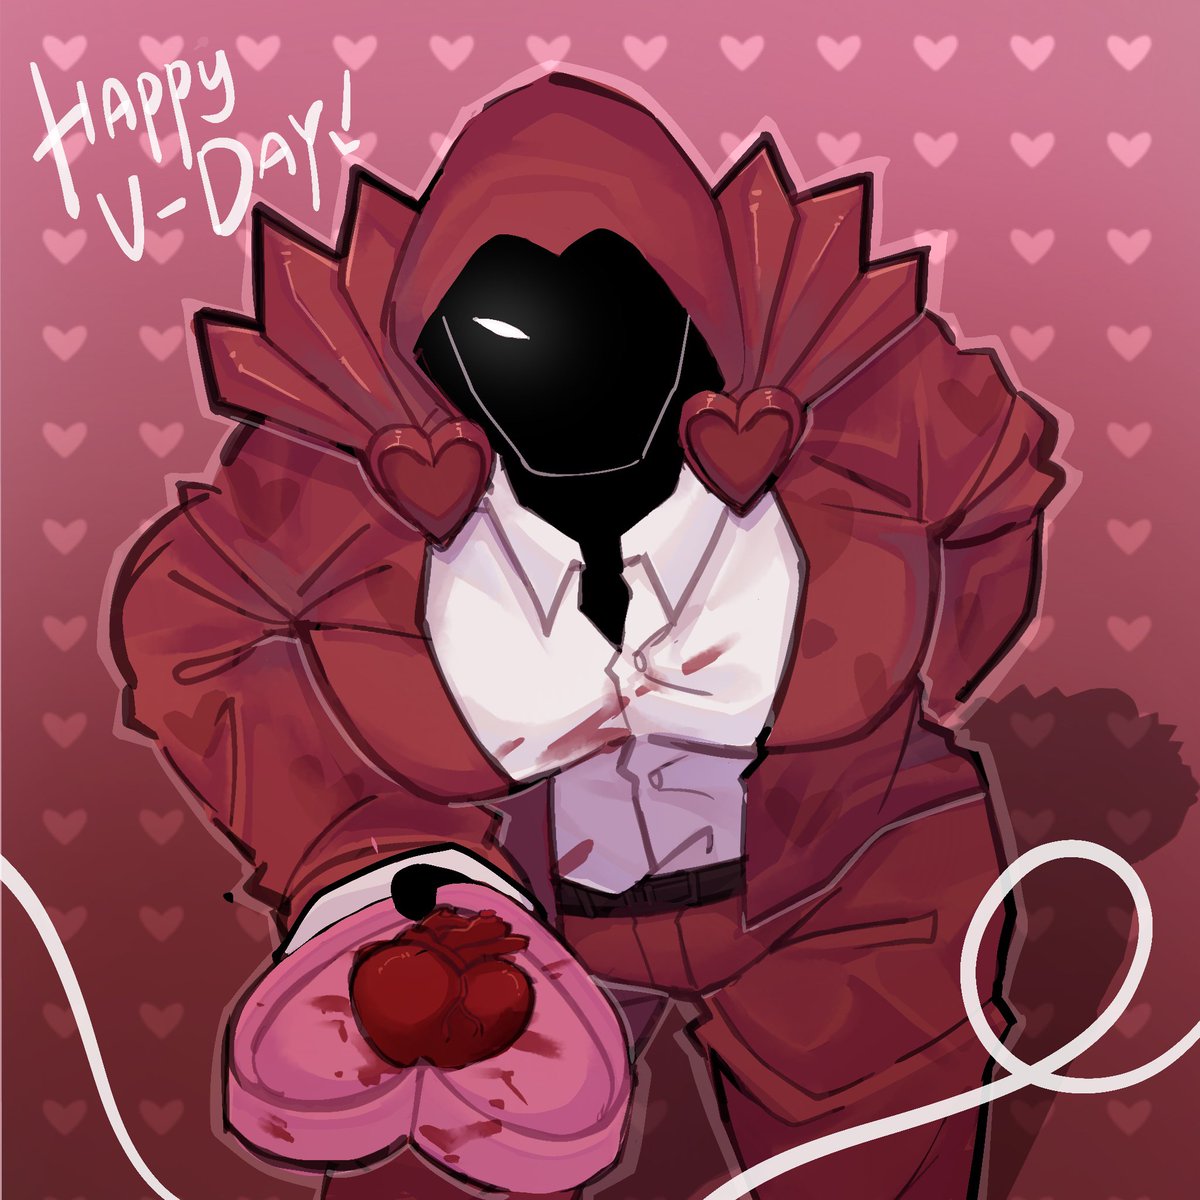 happy (early) valentines day from funny arsenl heart man
#robloxarsenal